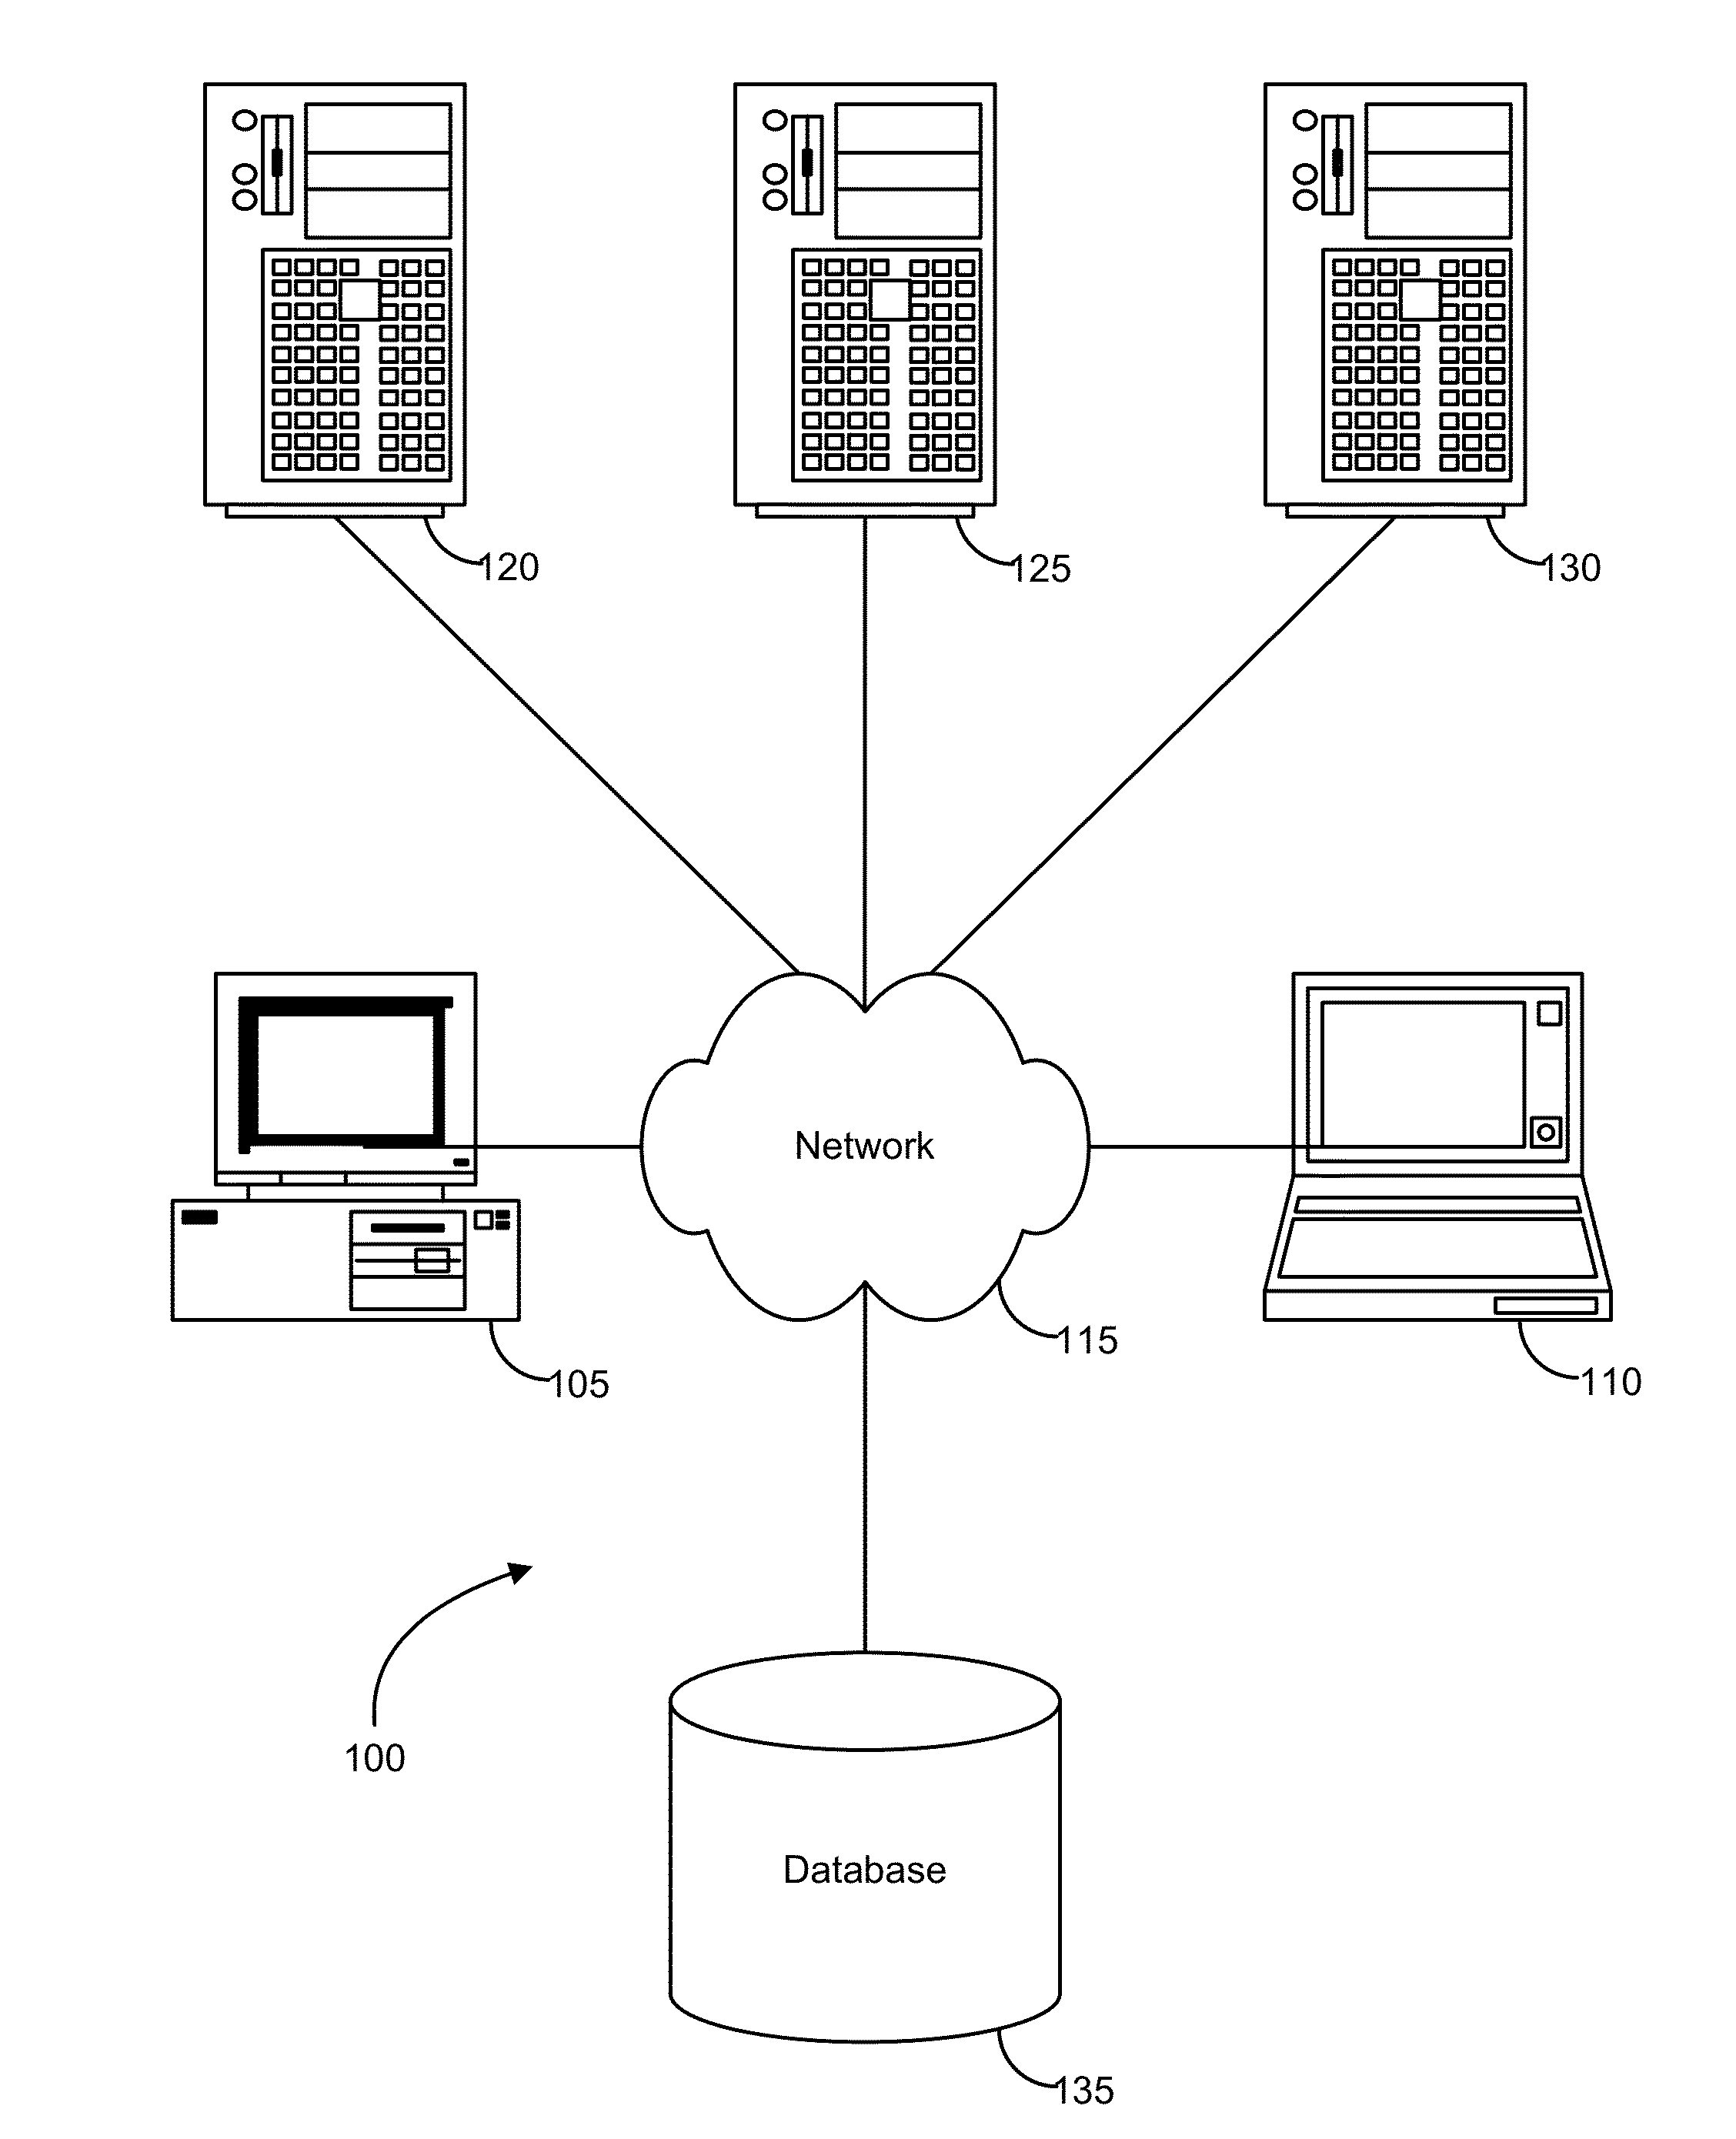 System and method for returning individual lines of a purchase requisition for correction and approval